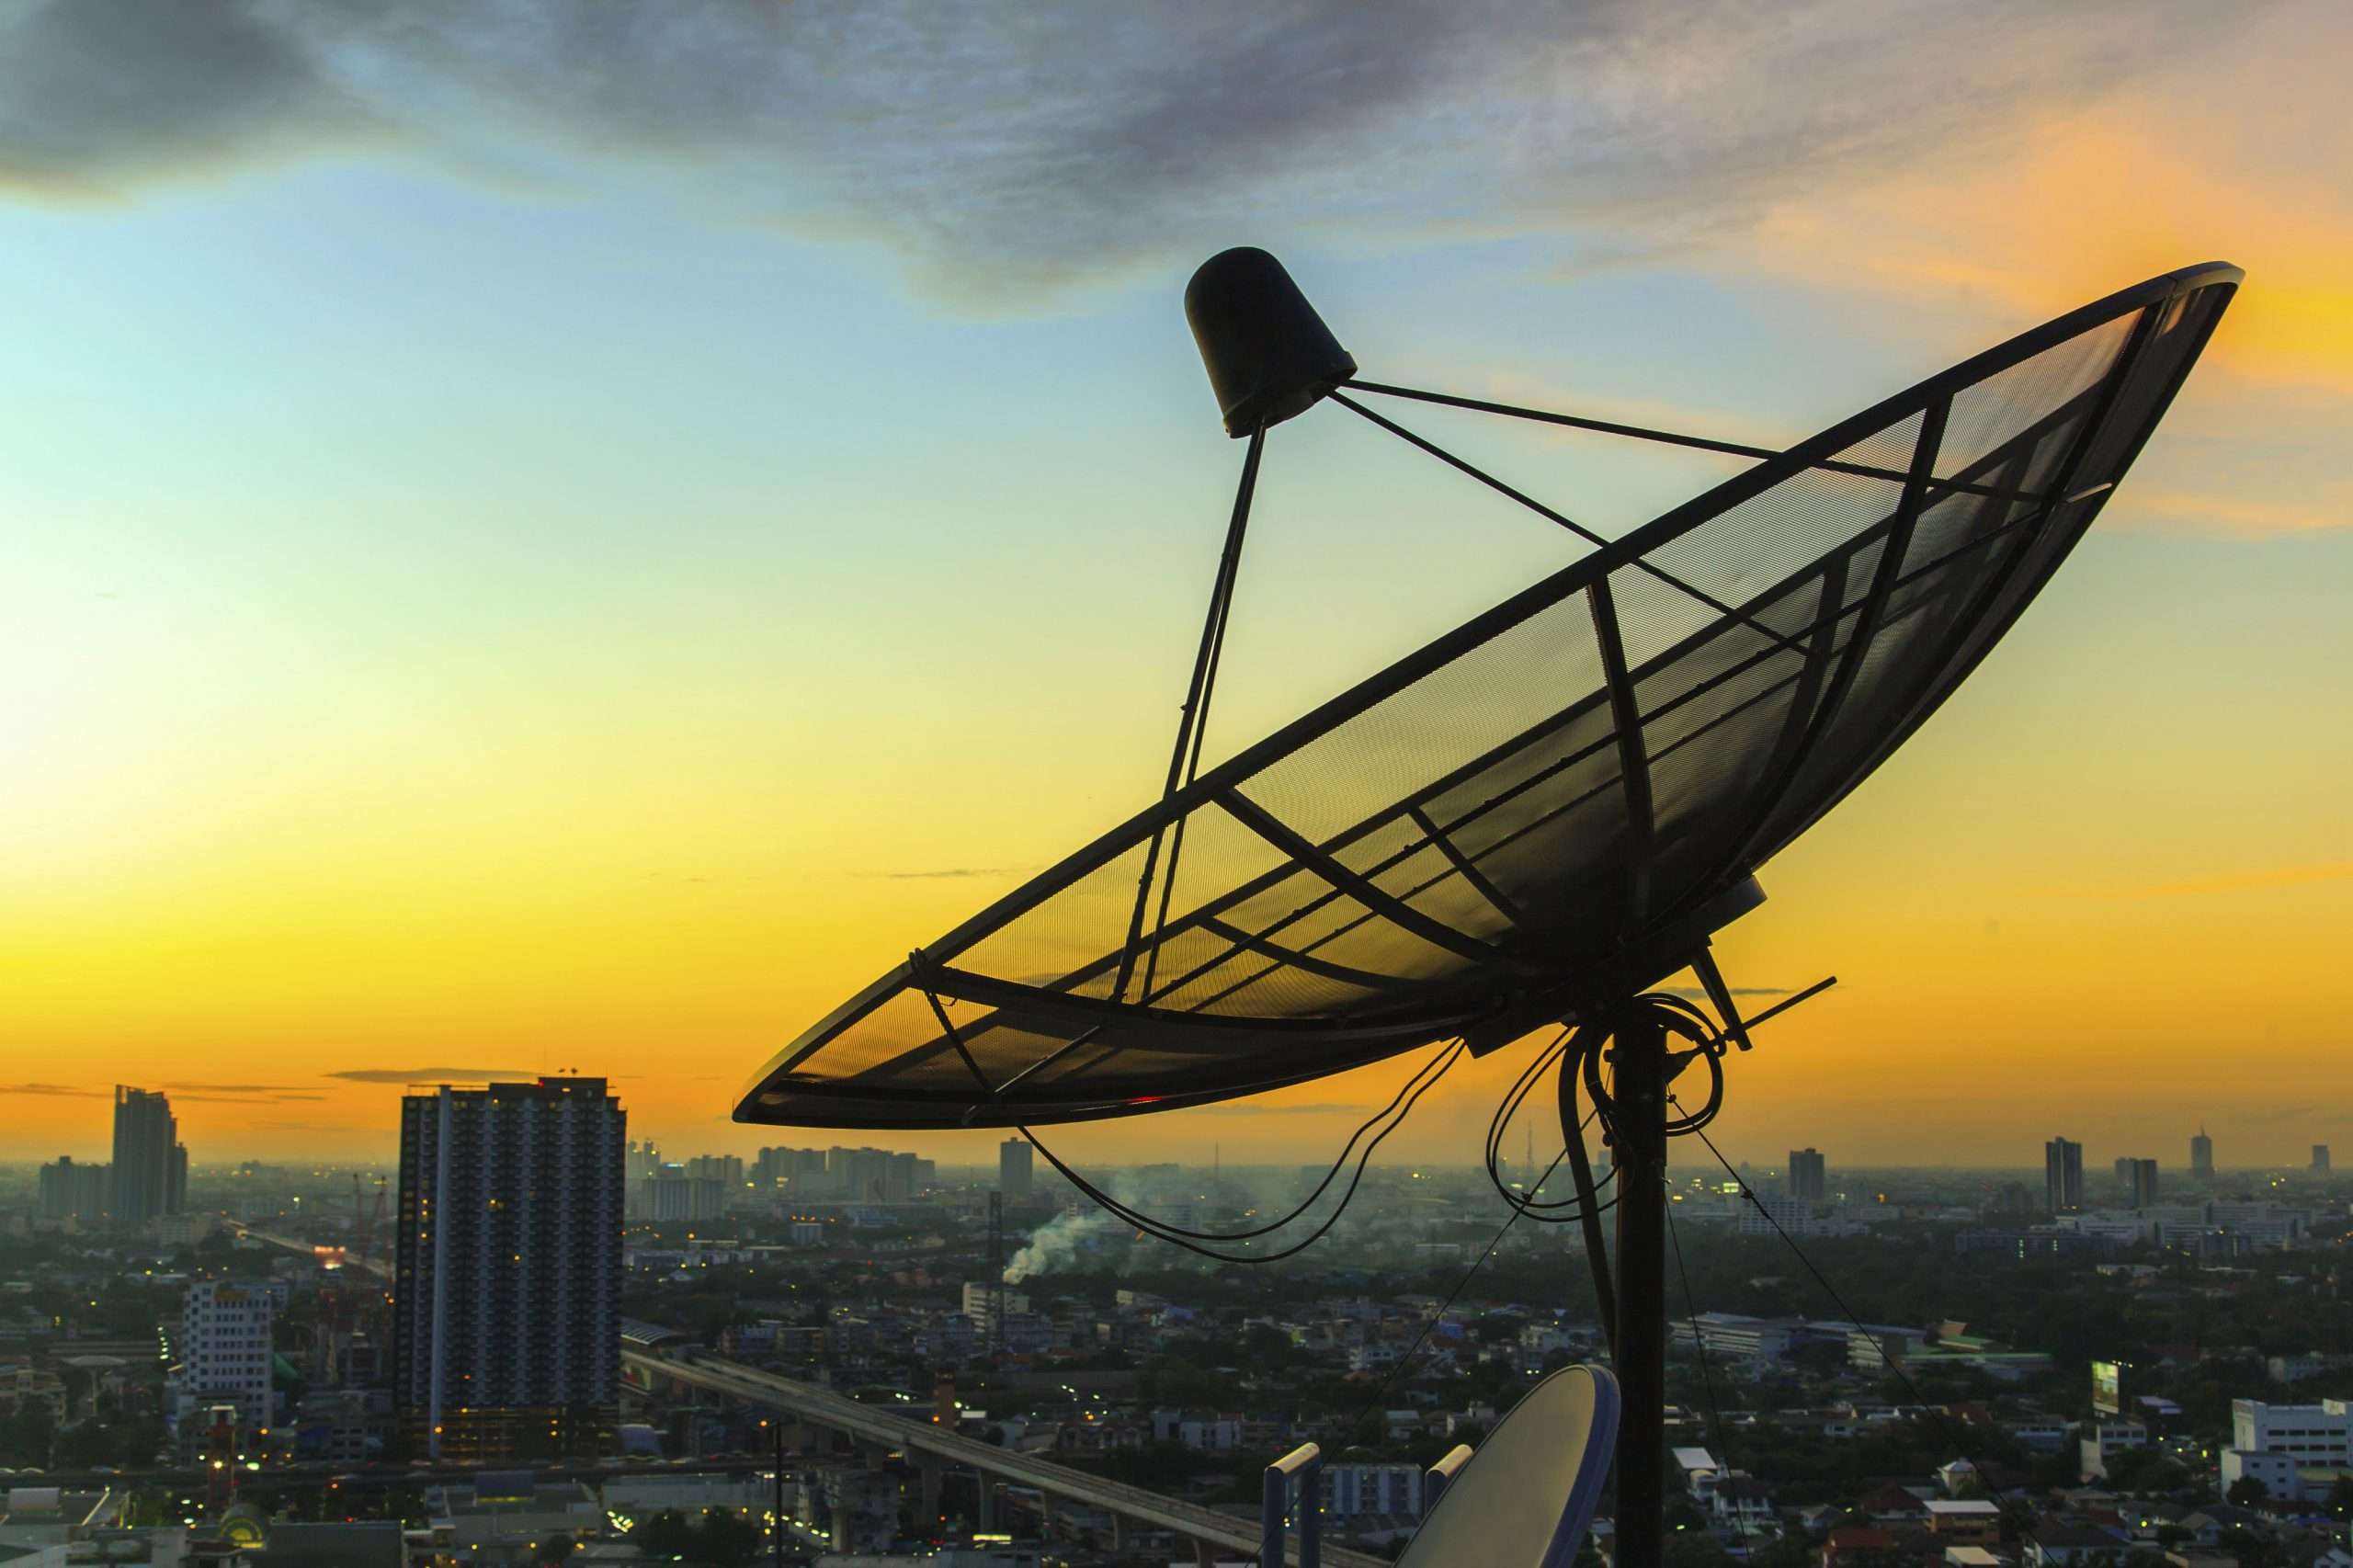 I satellite dish pointing to the sky at sundown or sunset.